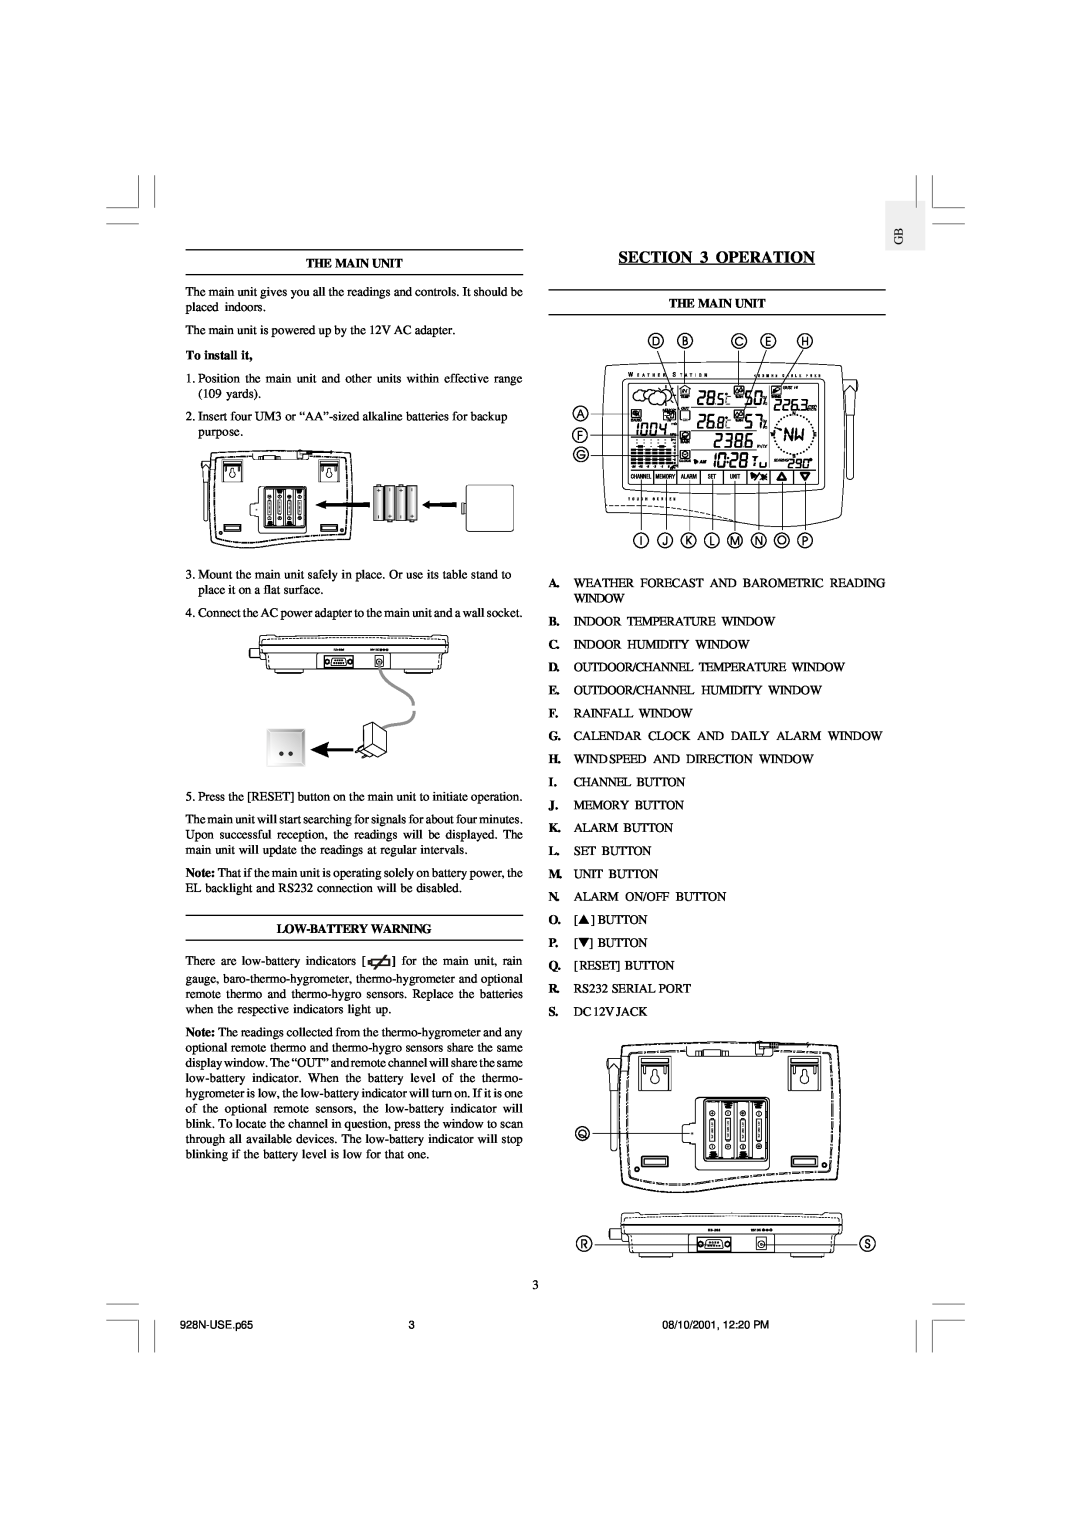 Oregon Scientific WMR968 user manual Operation, The Main Unit, To install it, Low-Batterywarning 